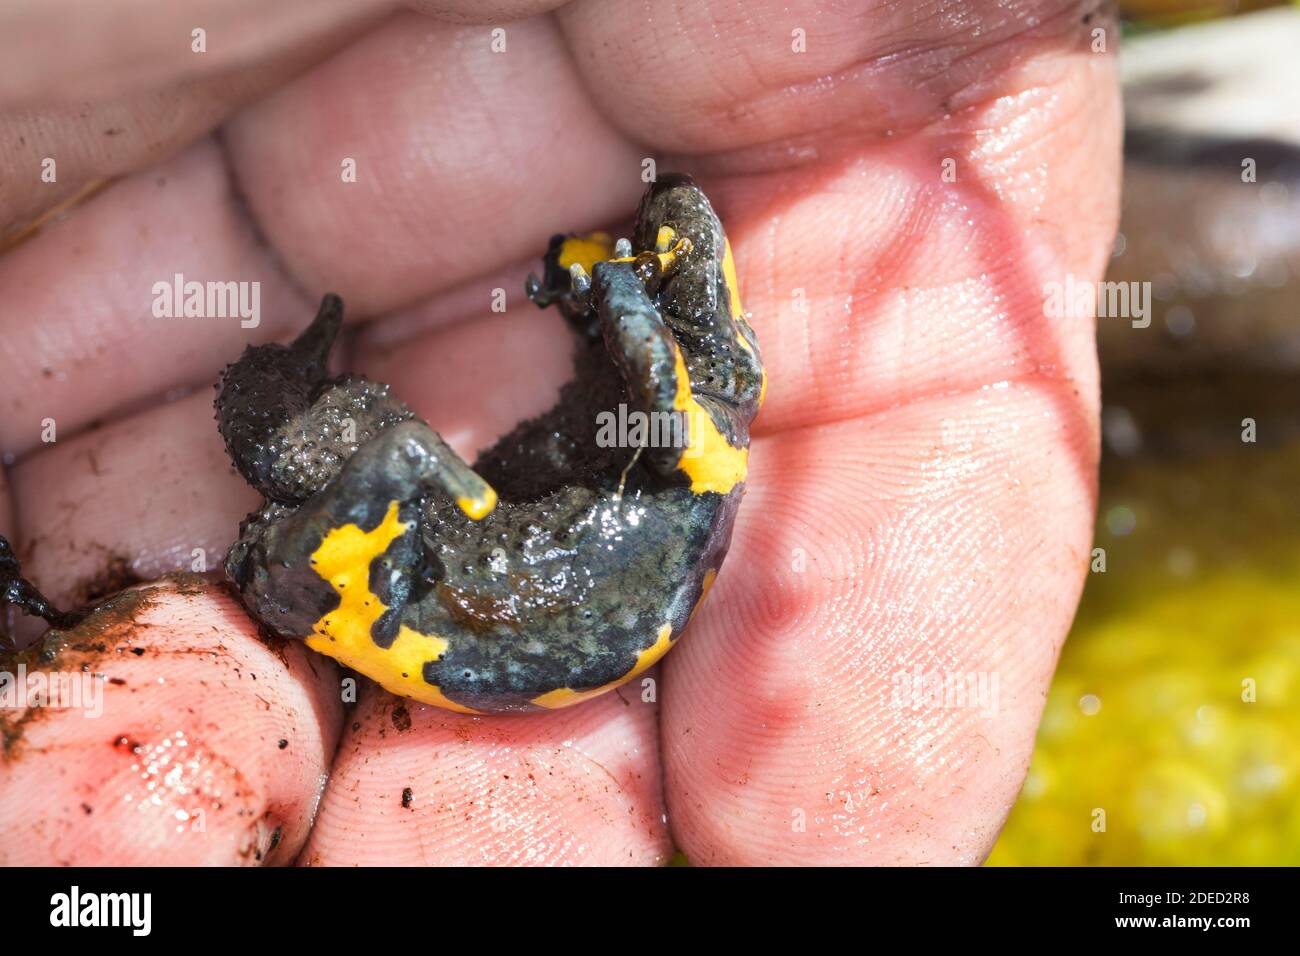 yellow-bellied toad, yellowbelly toad, variegated fire-toad (Bombina variegata), unken reflex at danger, Germany Stock Photo